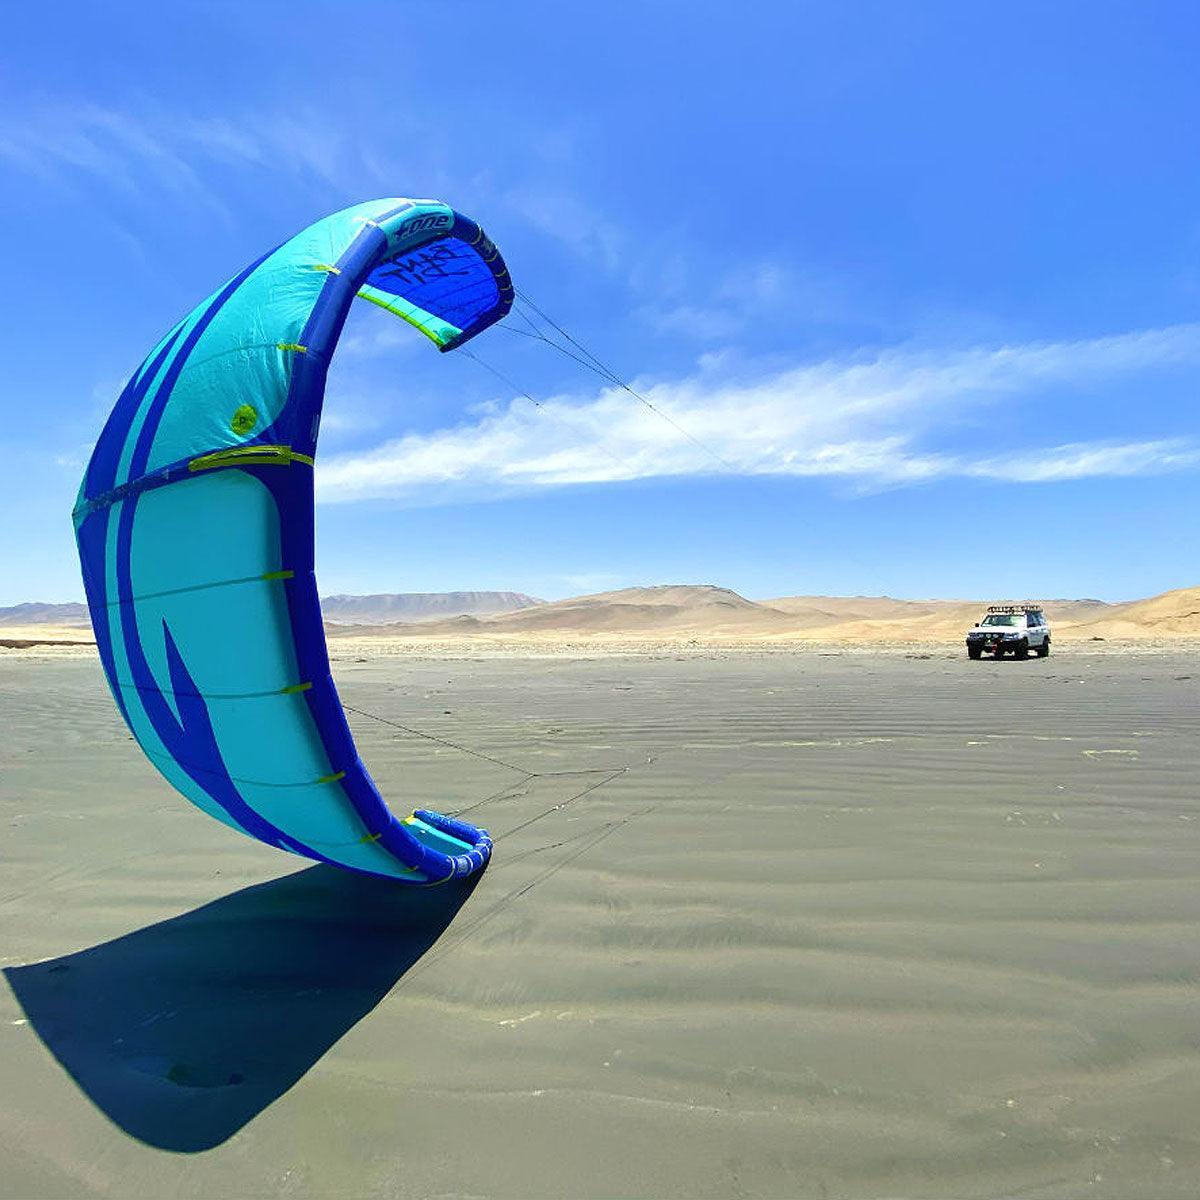 Solo Strap 'Only One' Self-Launch Kite Leash - Kitesurf